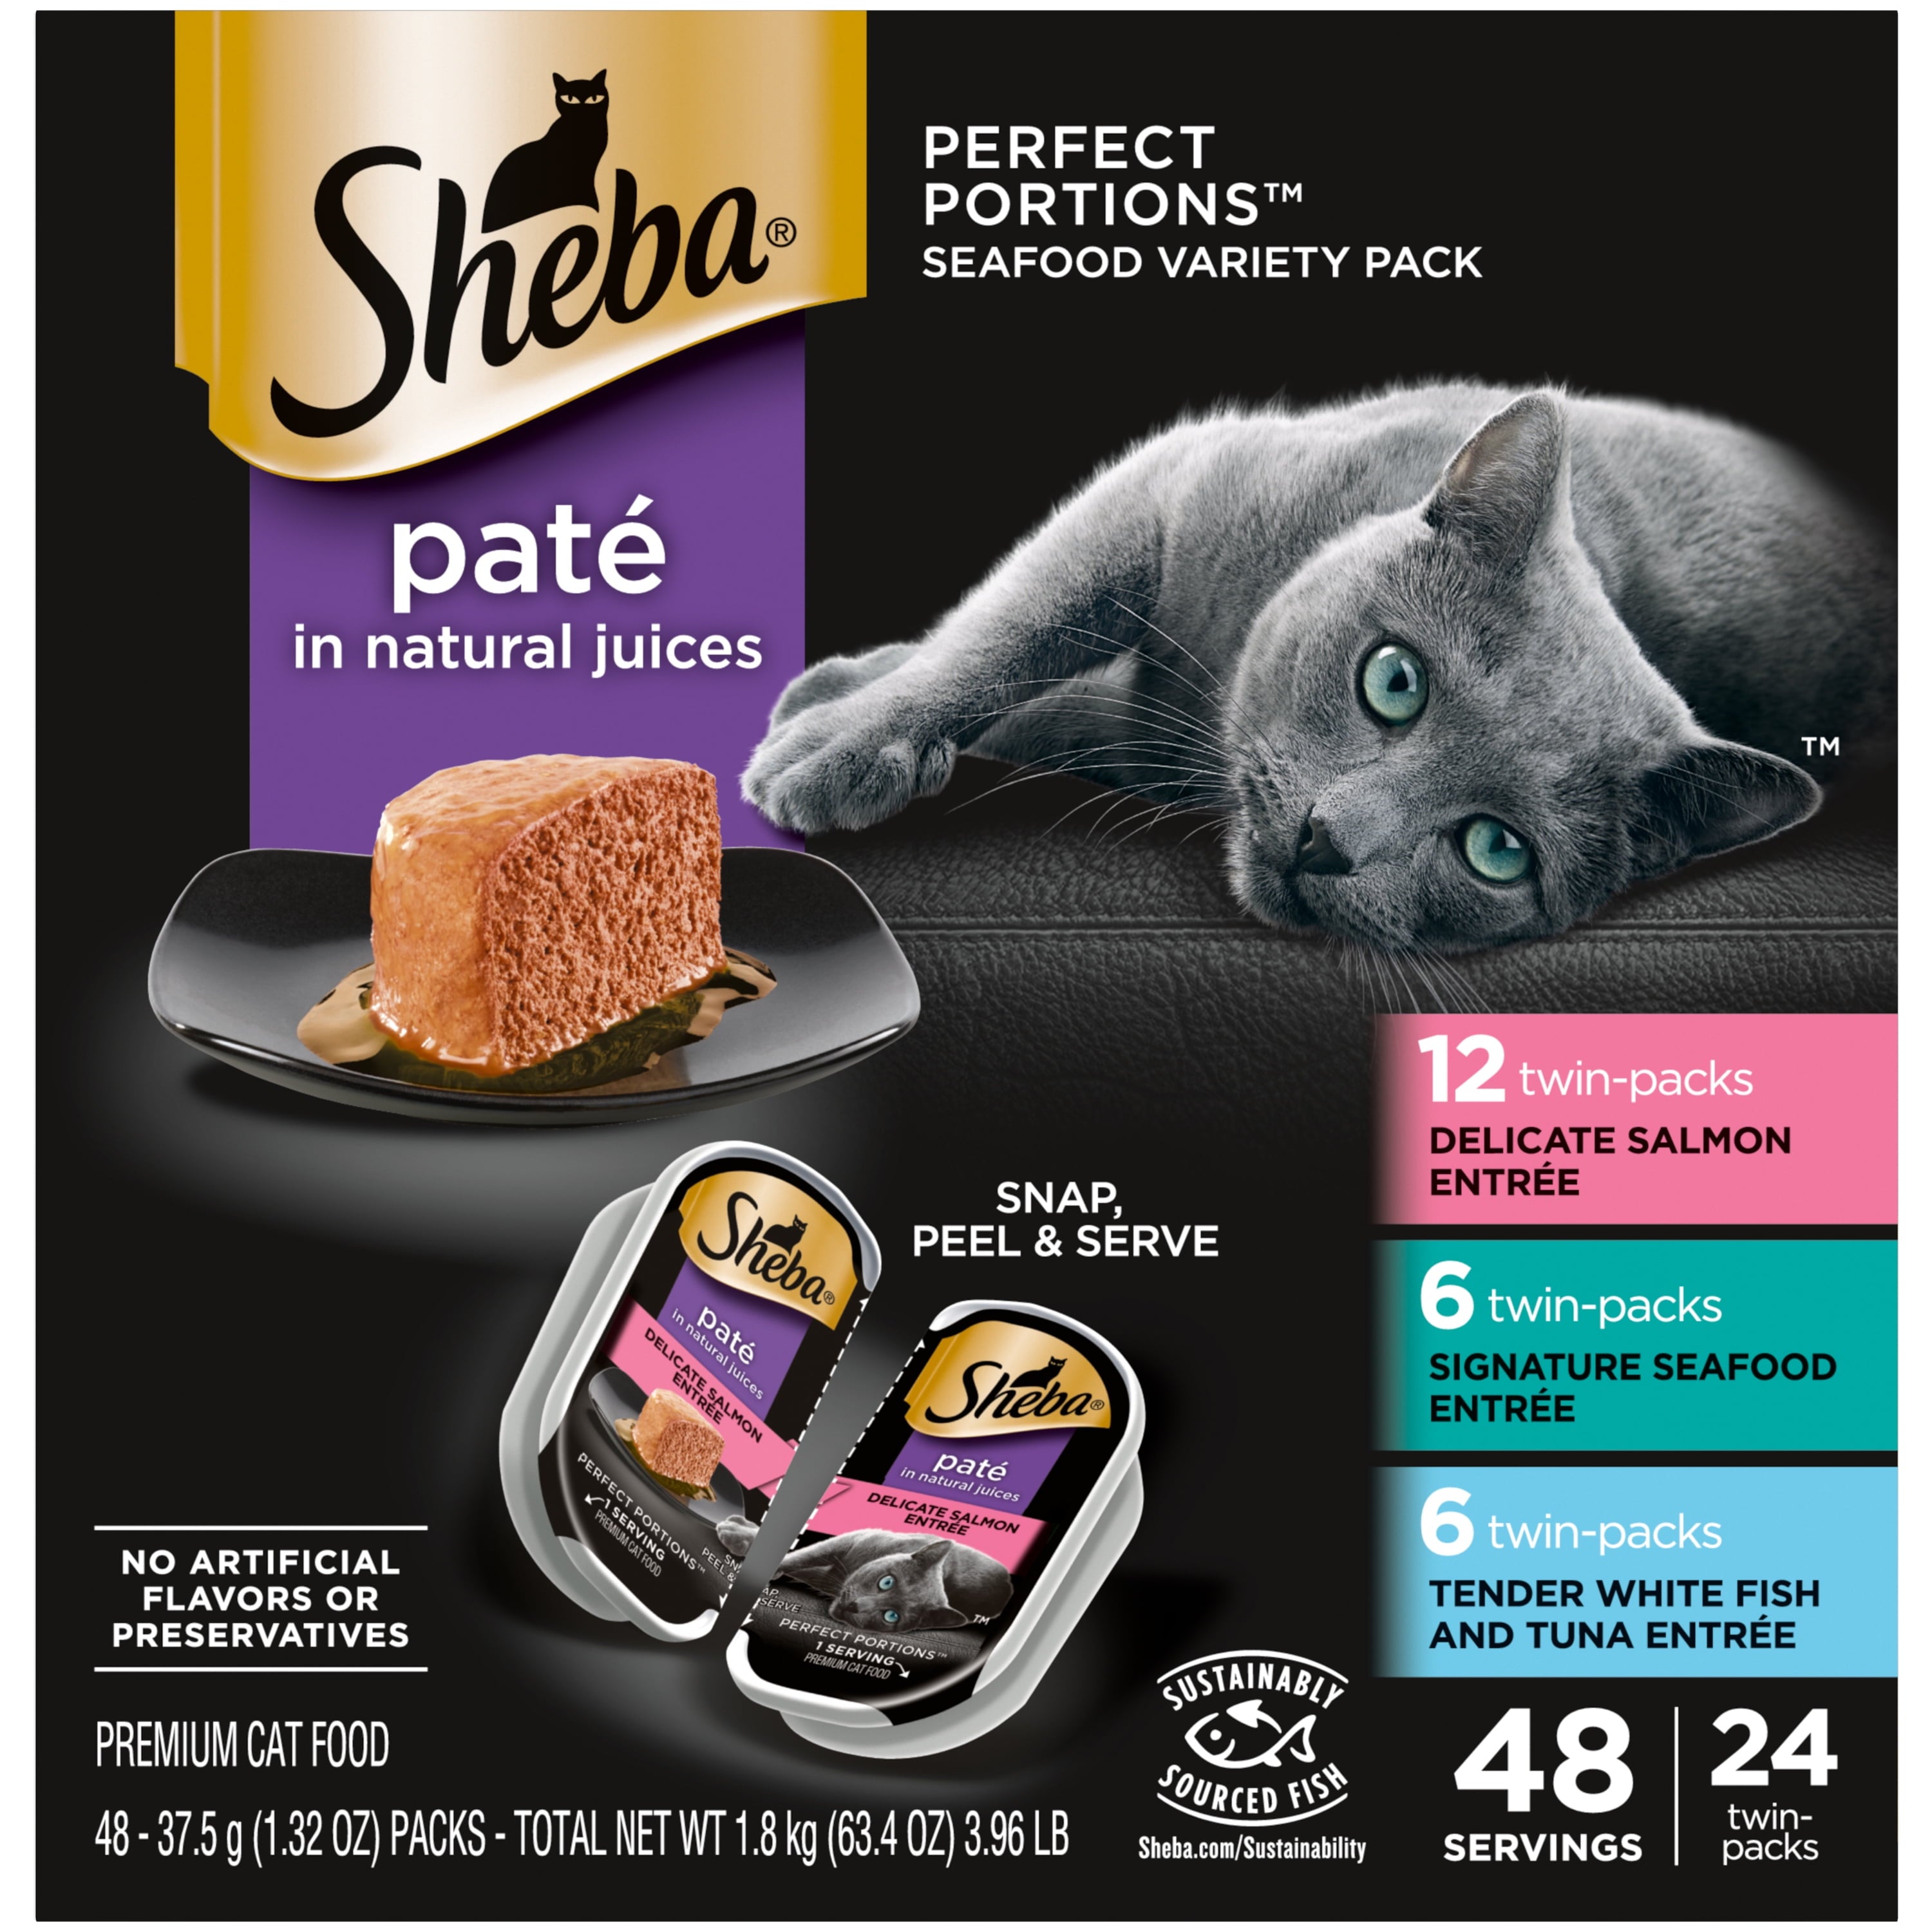 Wholesale prices with free shipping all over United States SHEBA Wet Cat Food Pate Variety Pack, Signature Seafood, Delicate Salmon and Tender Whitefish & Tuna Entrees, 2.6 oz. PERFECT PORTIONS Twin-Pack Trays - Steven Deals